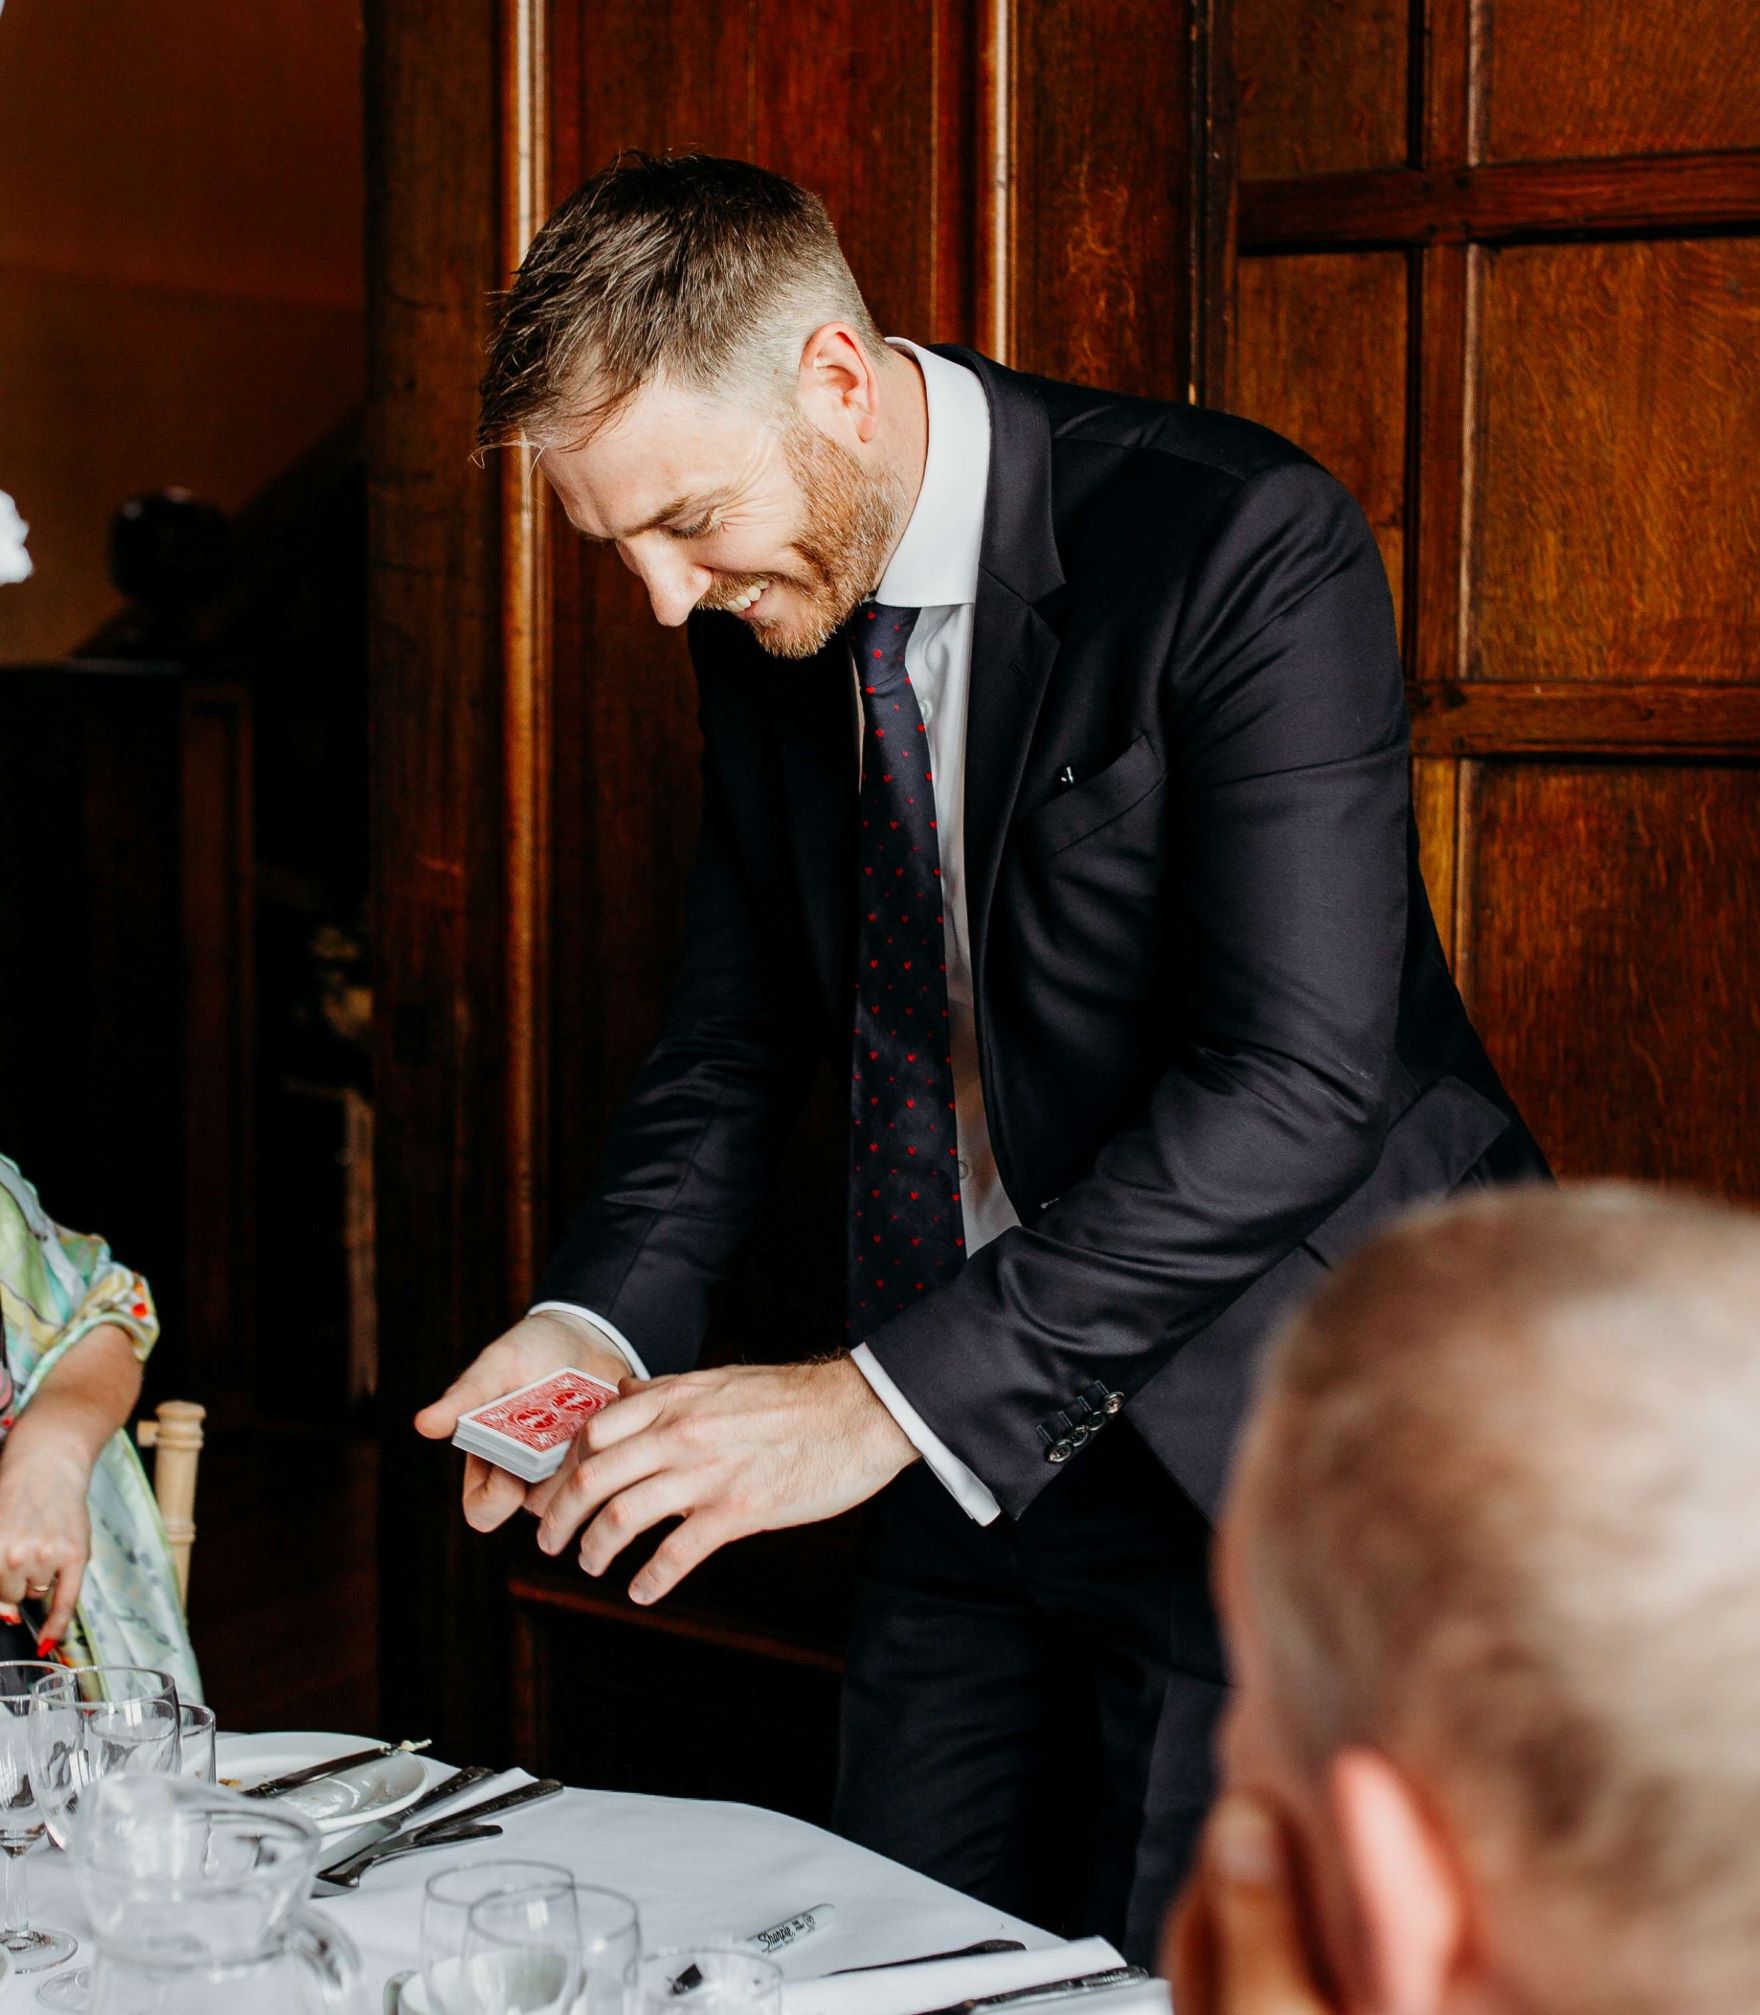 Magician Richard Symes tricking guests at the wedding breakfast